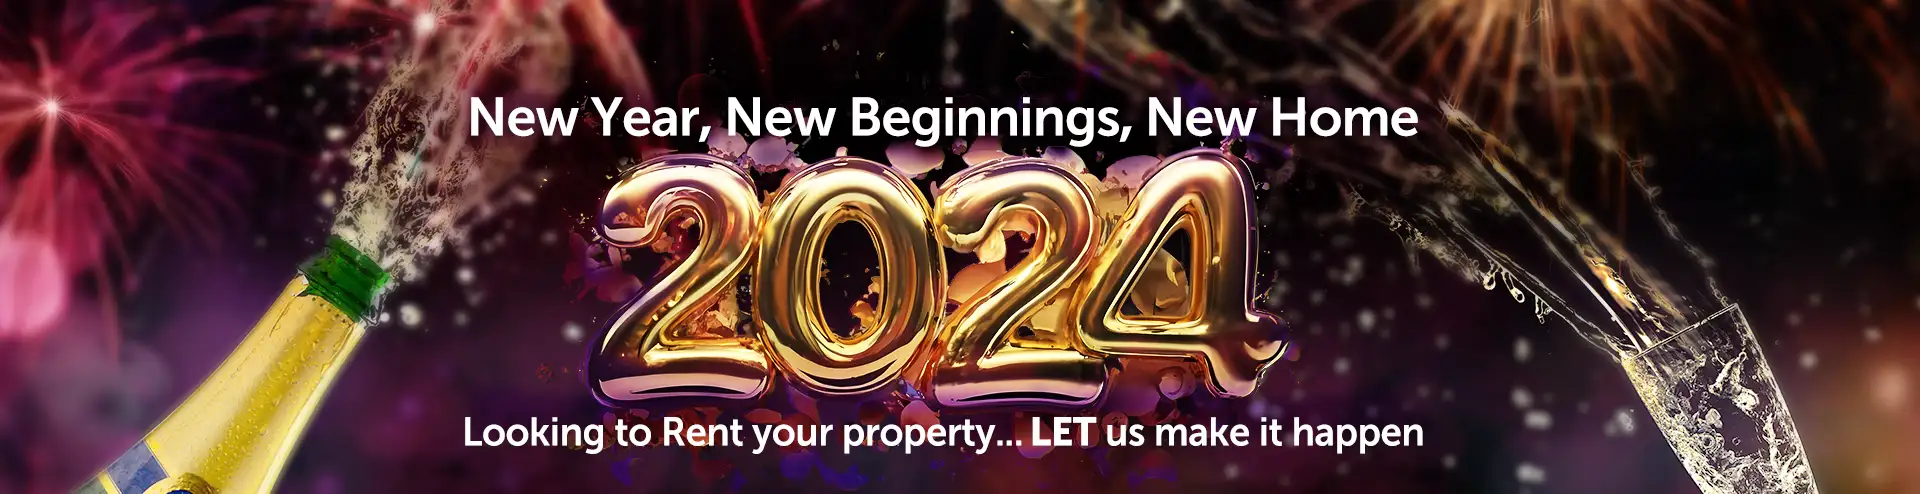 Letting agents - Looking to rent your property